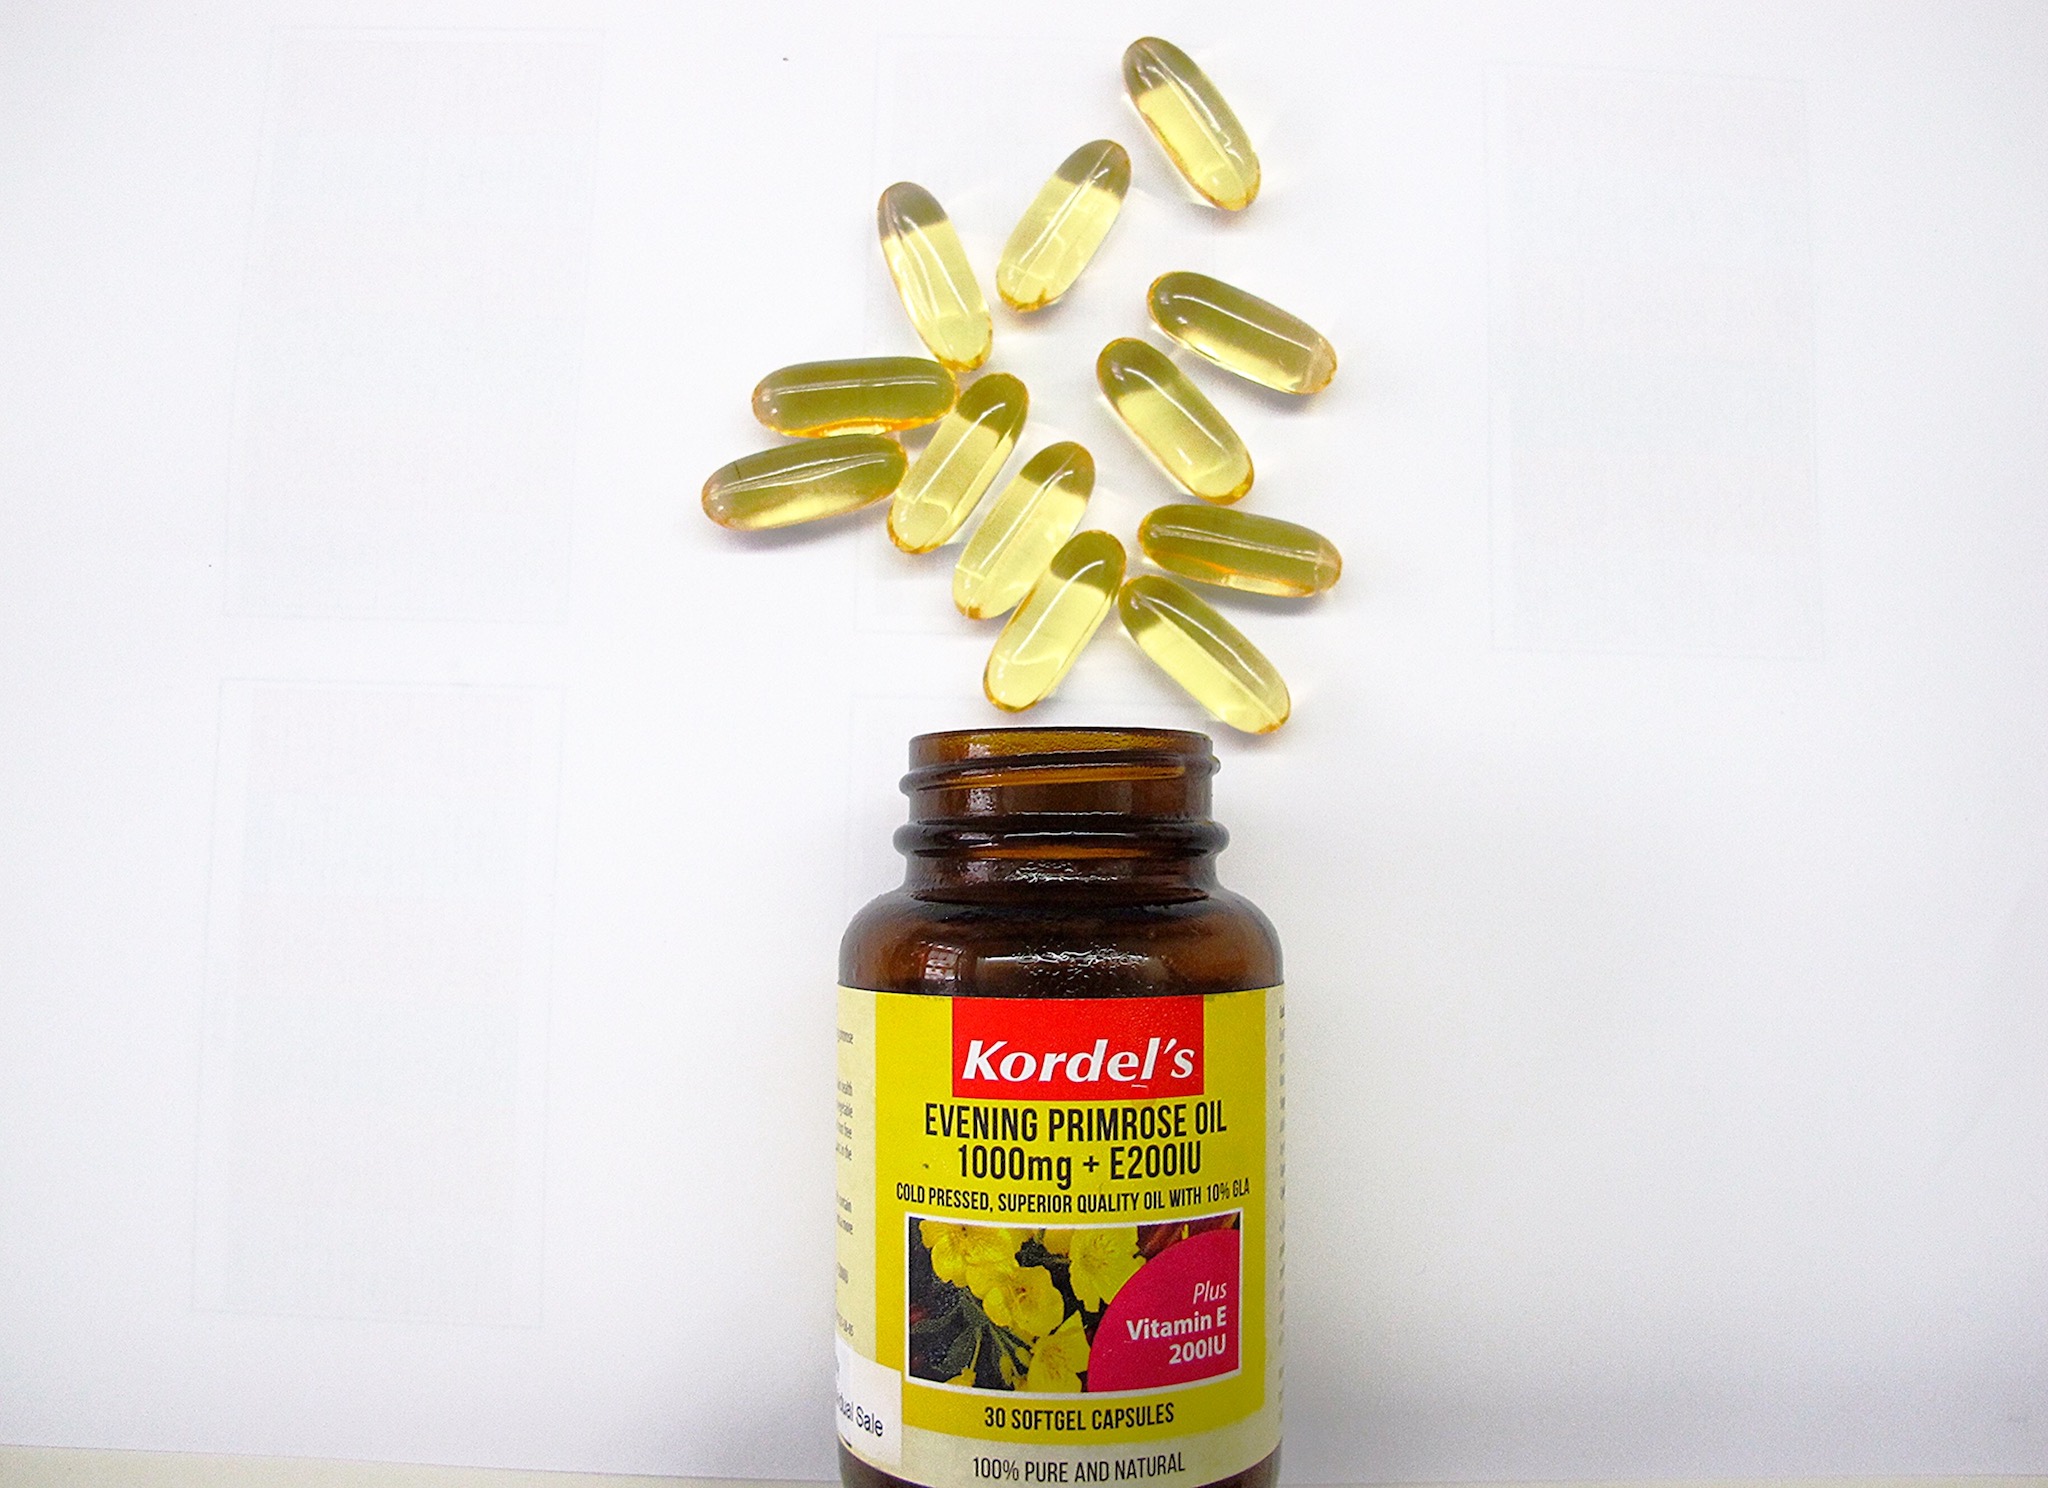 morsel evening primrose oil review hormonal chin acne cure treatment